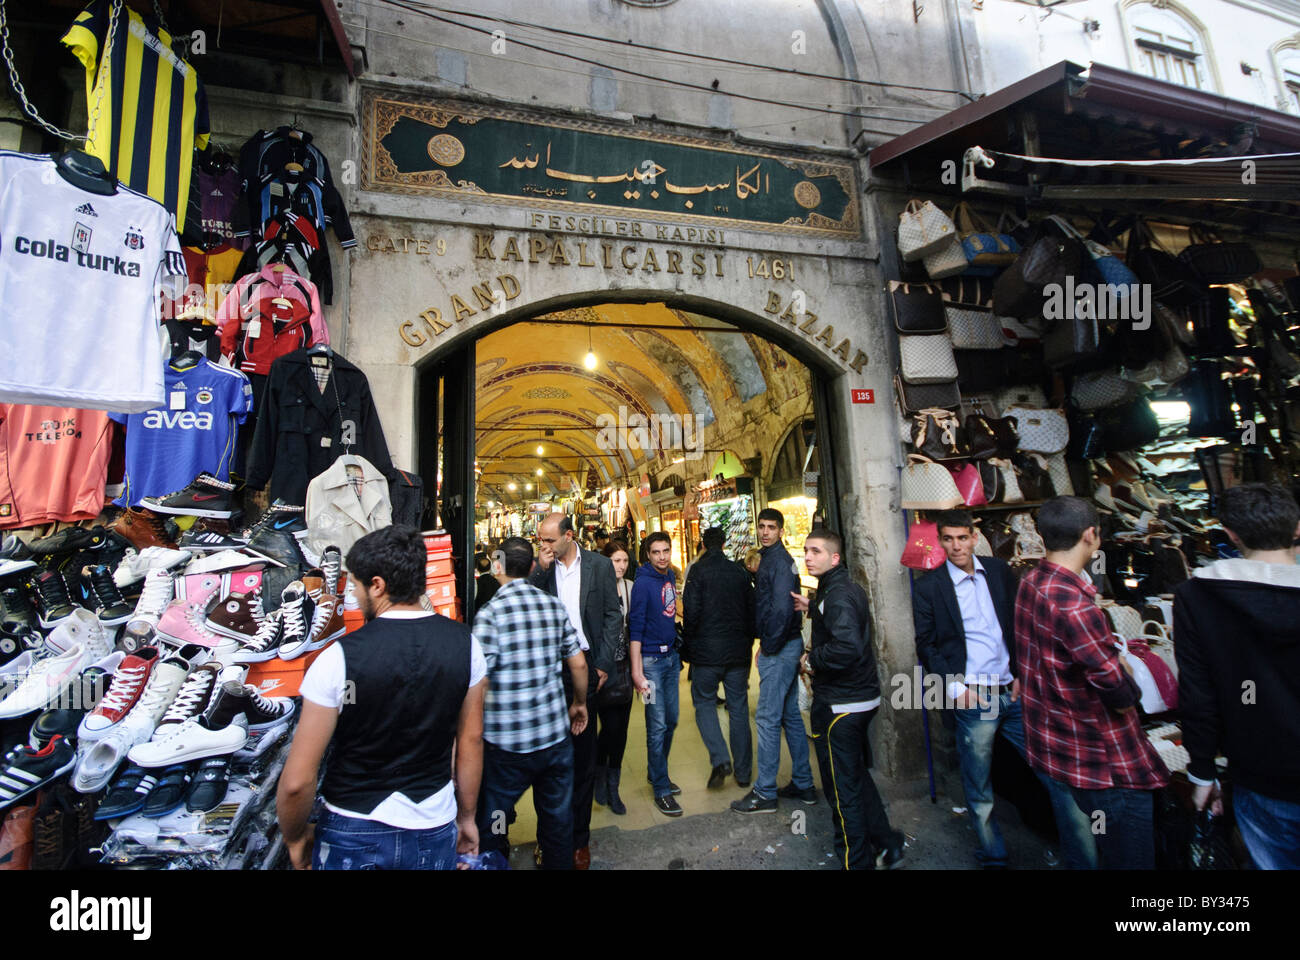 Gate 9 at Kapalocaso, ne of the entrances to Istanbul's historic Grand Bazaar dating to 1461. The outside of the complex is lined with yet more stores, so the entrances end up being rather hidden amongst the bustle. Inside are every-narrowing covered streets and passageways. Stock Photo